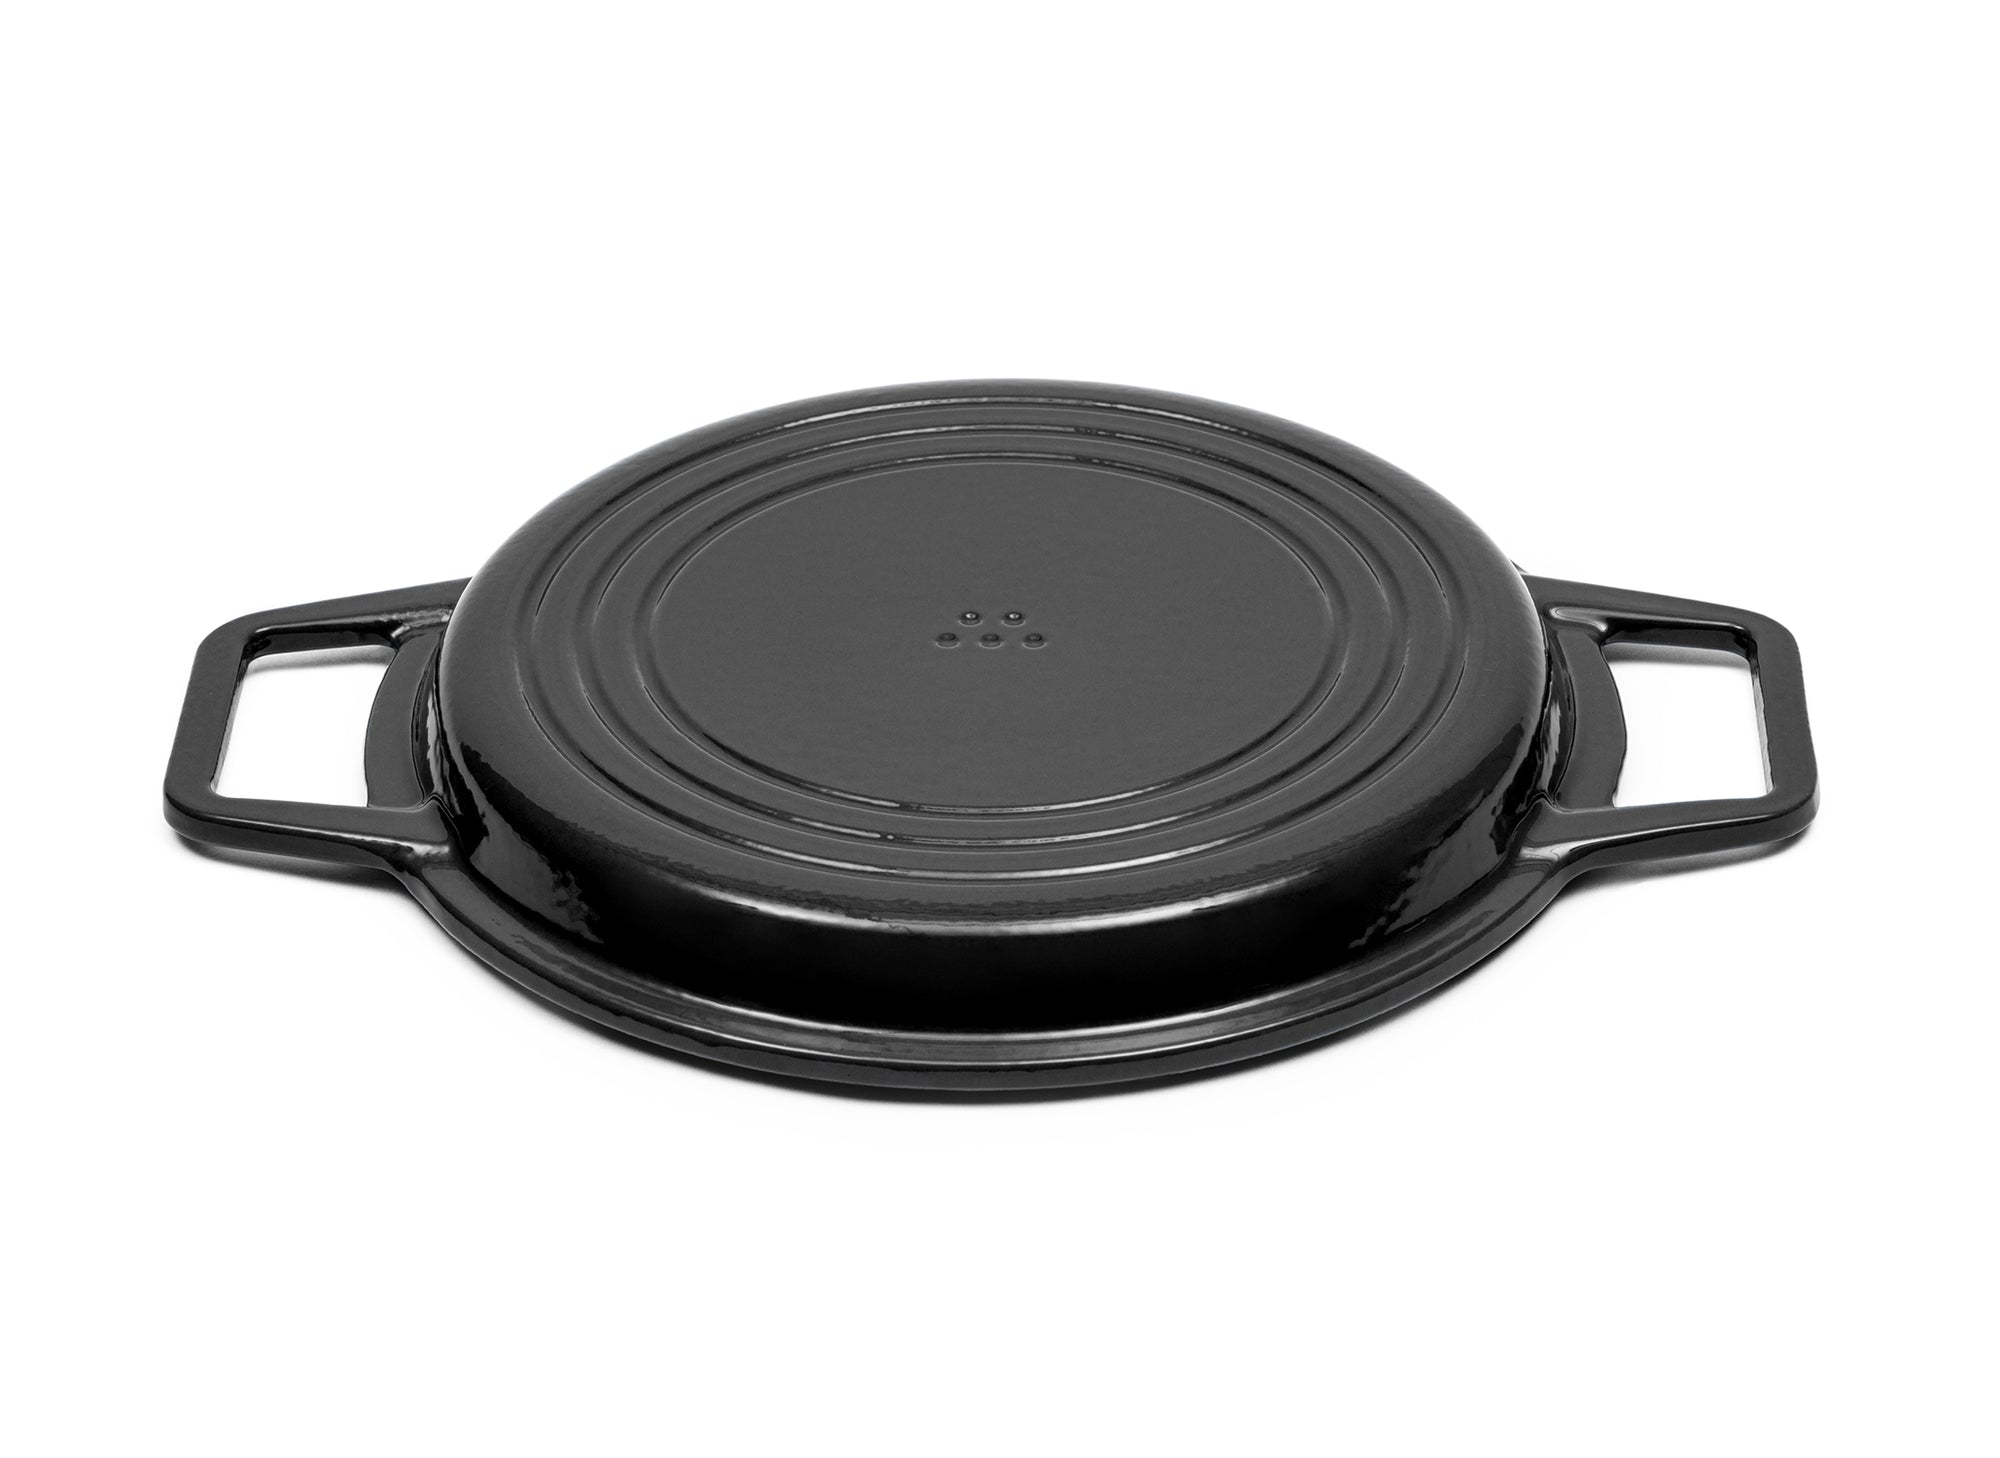 Black Grill Lid for 7-quart Dutch oven face down on white background.